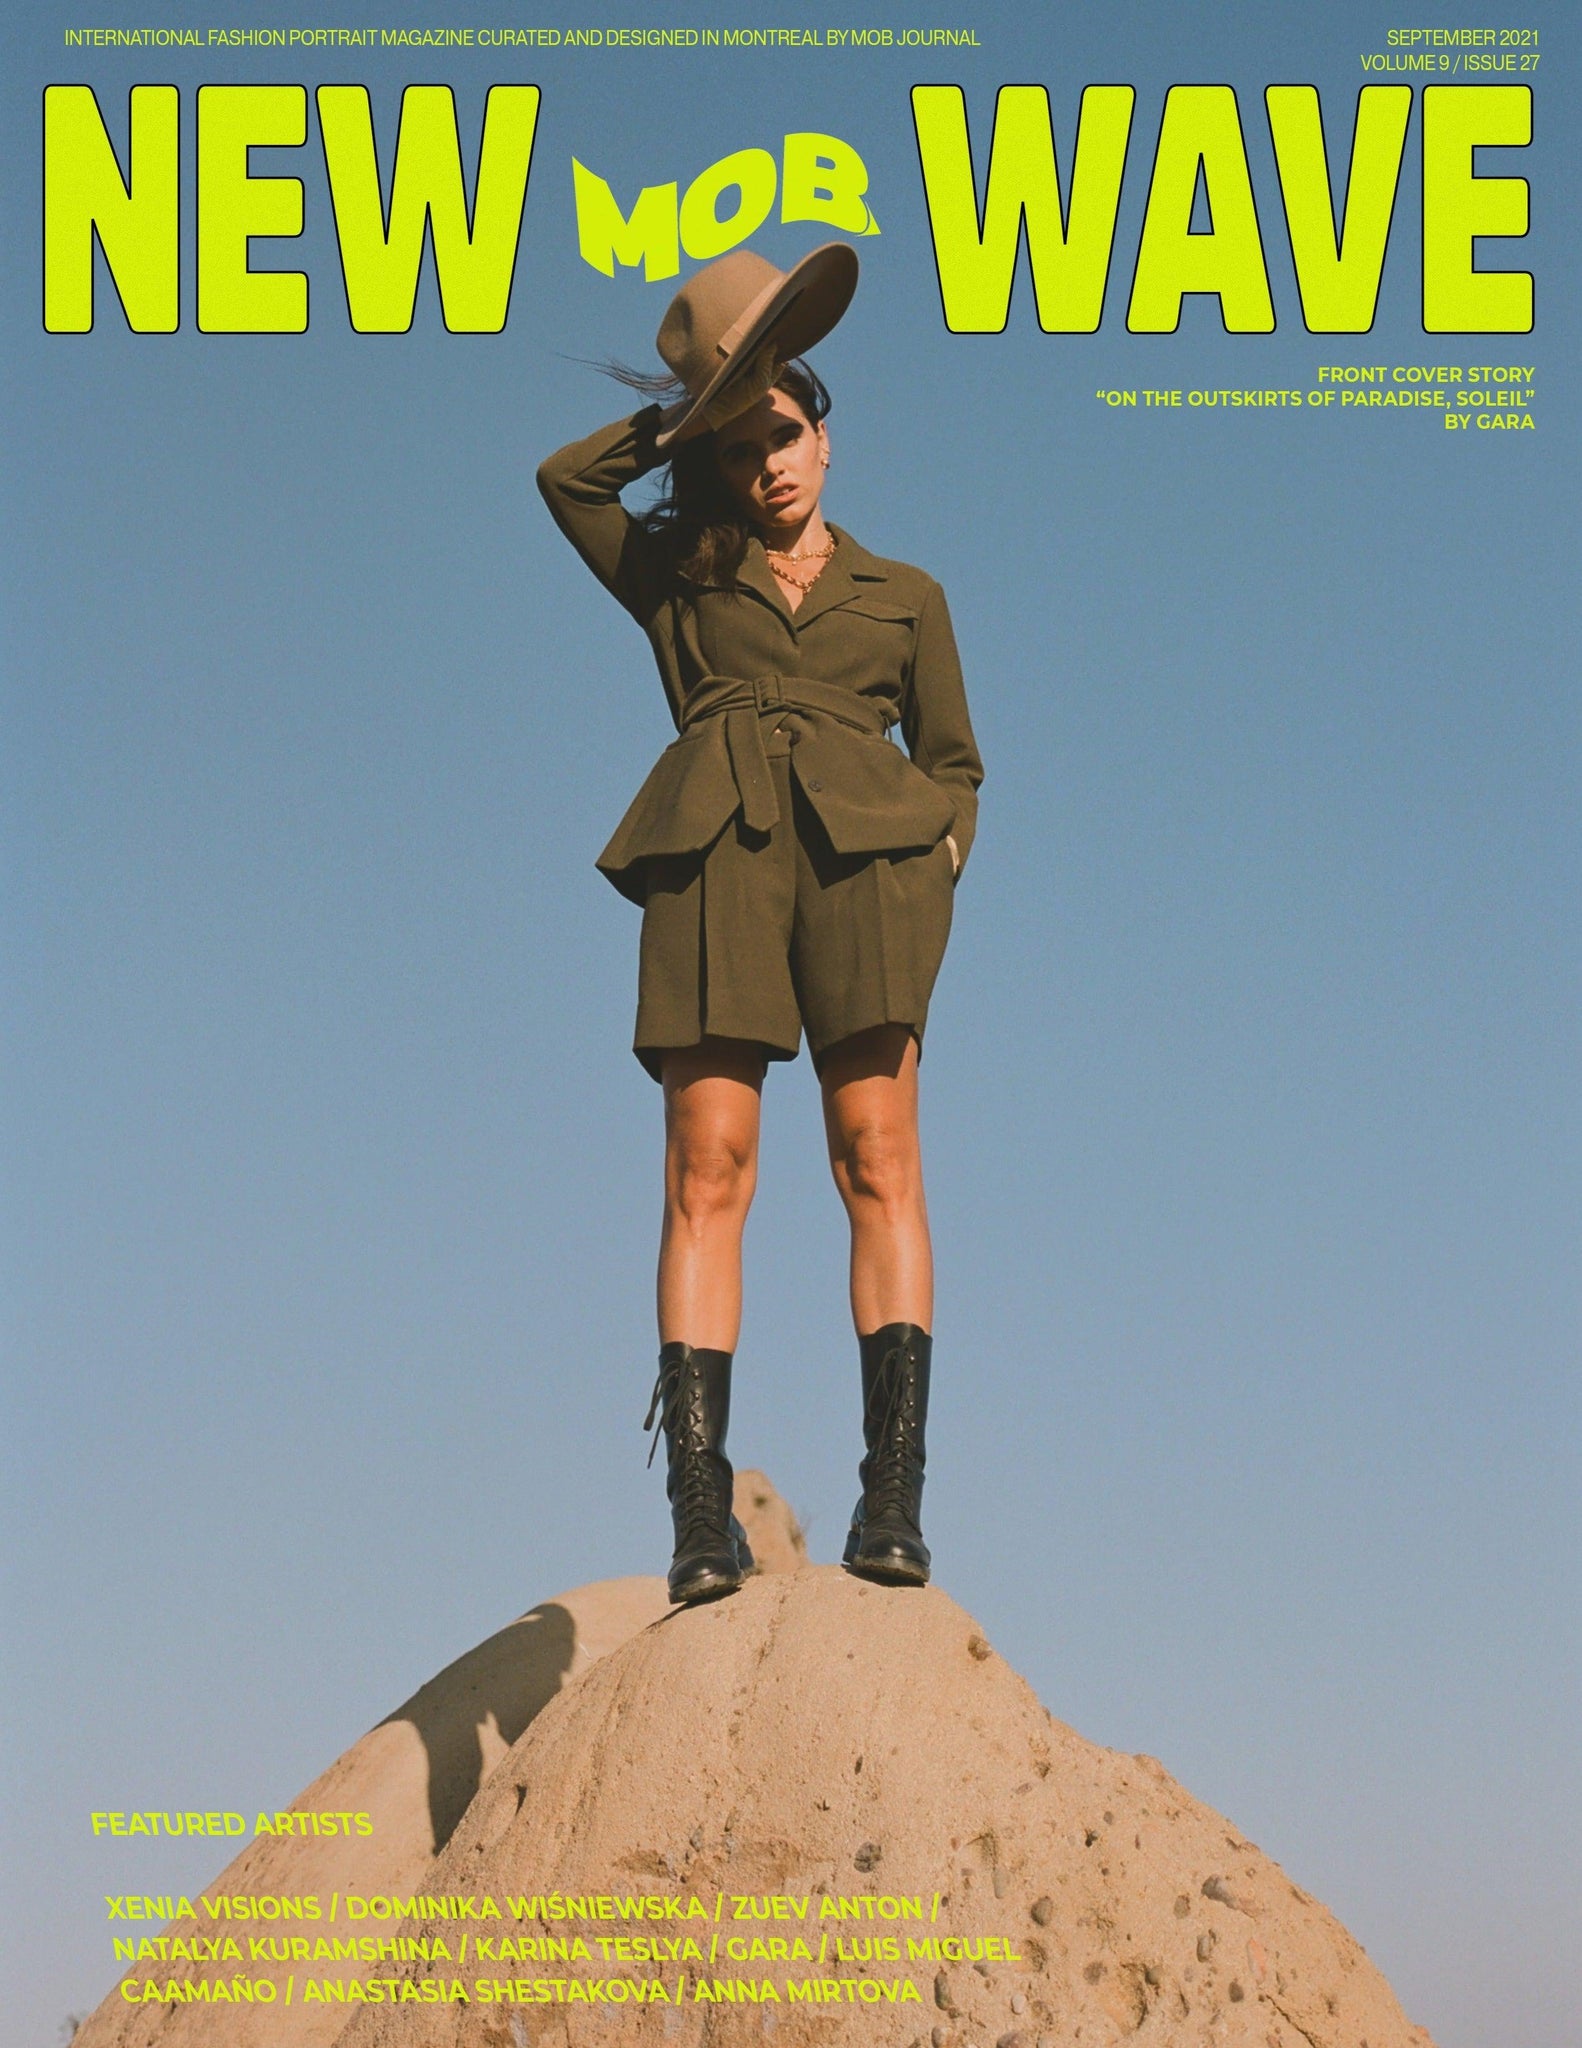 NEW WAVE | VOLUME NINE | ISSUE #27 - Mob Journal